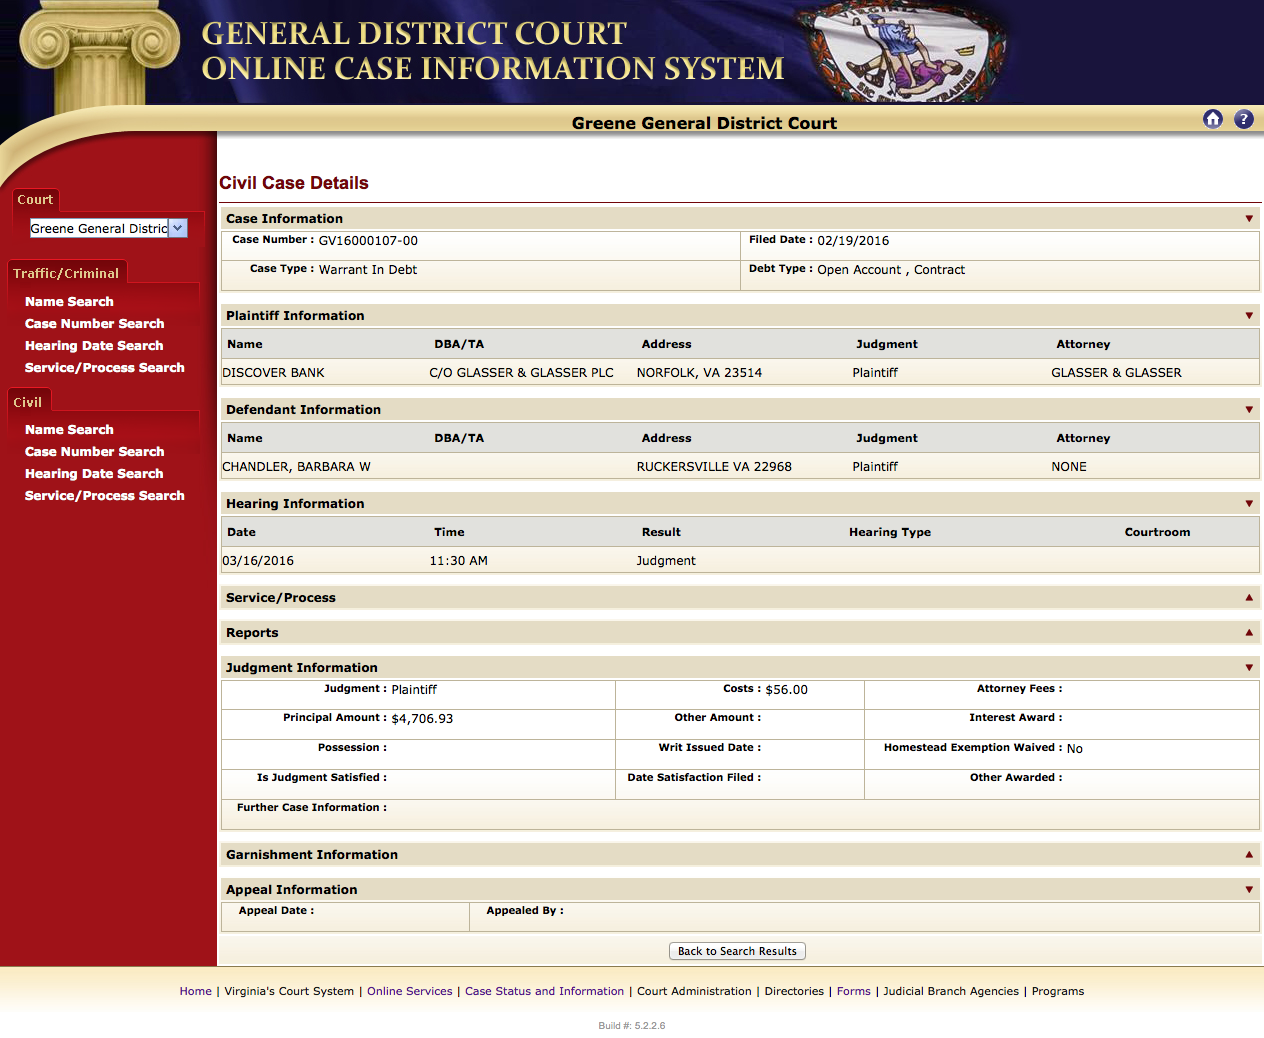 screenshot-eapps courts state va us 2016-03-16 12-05-09.png